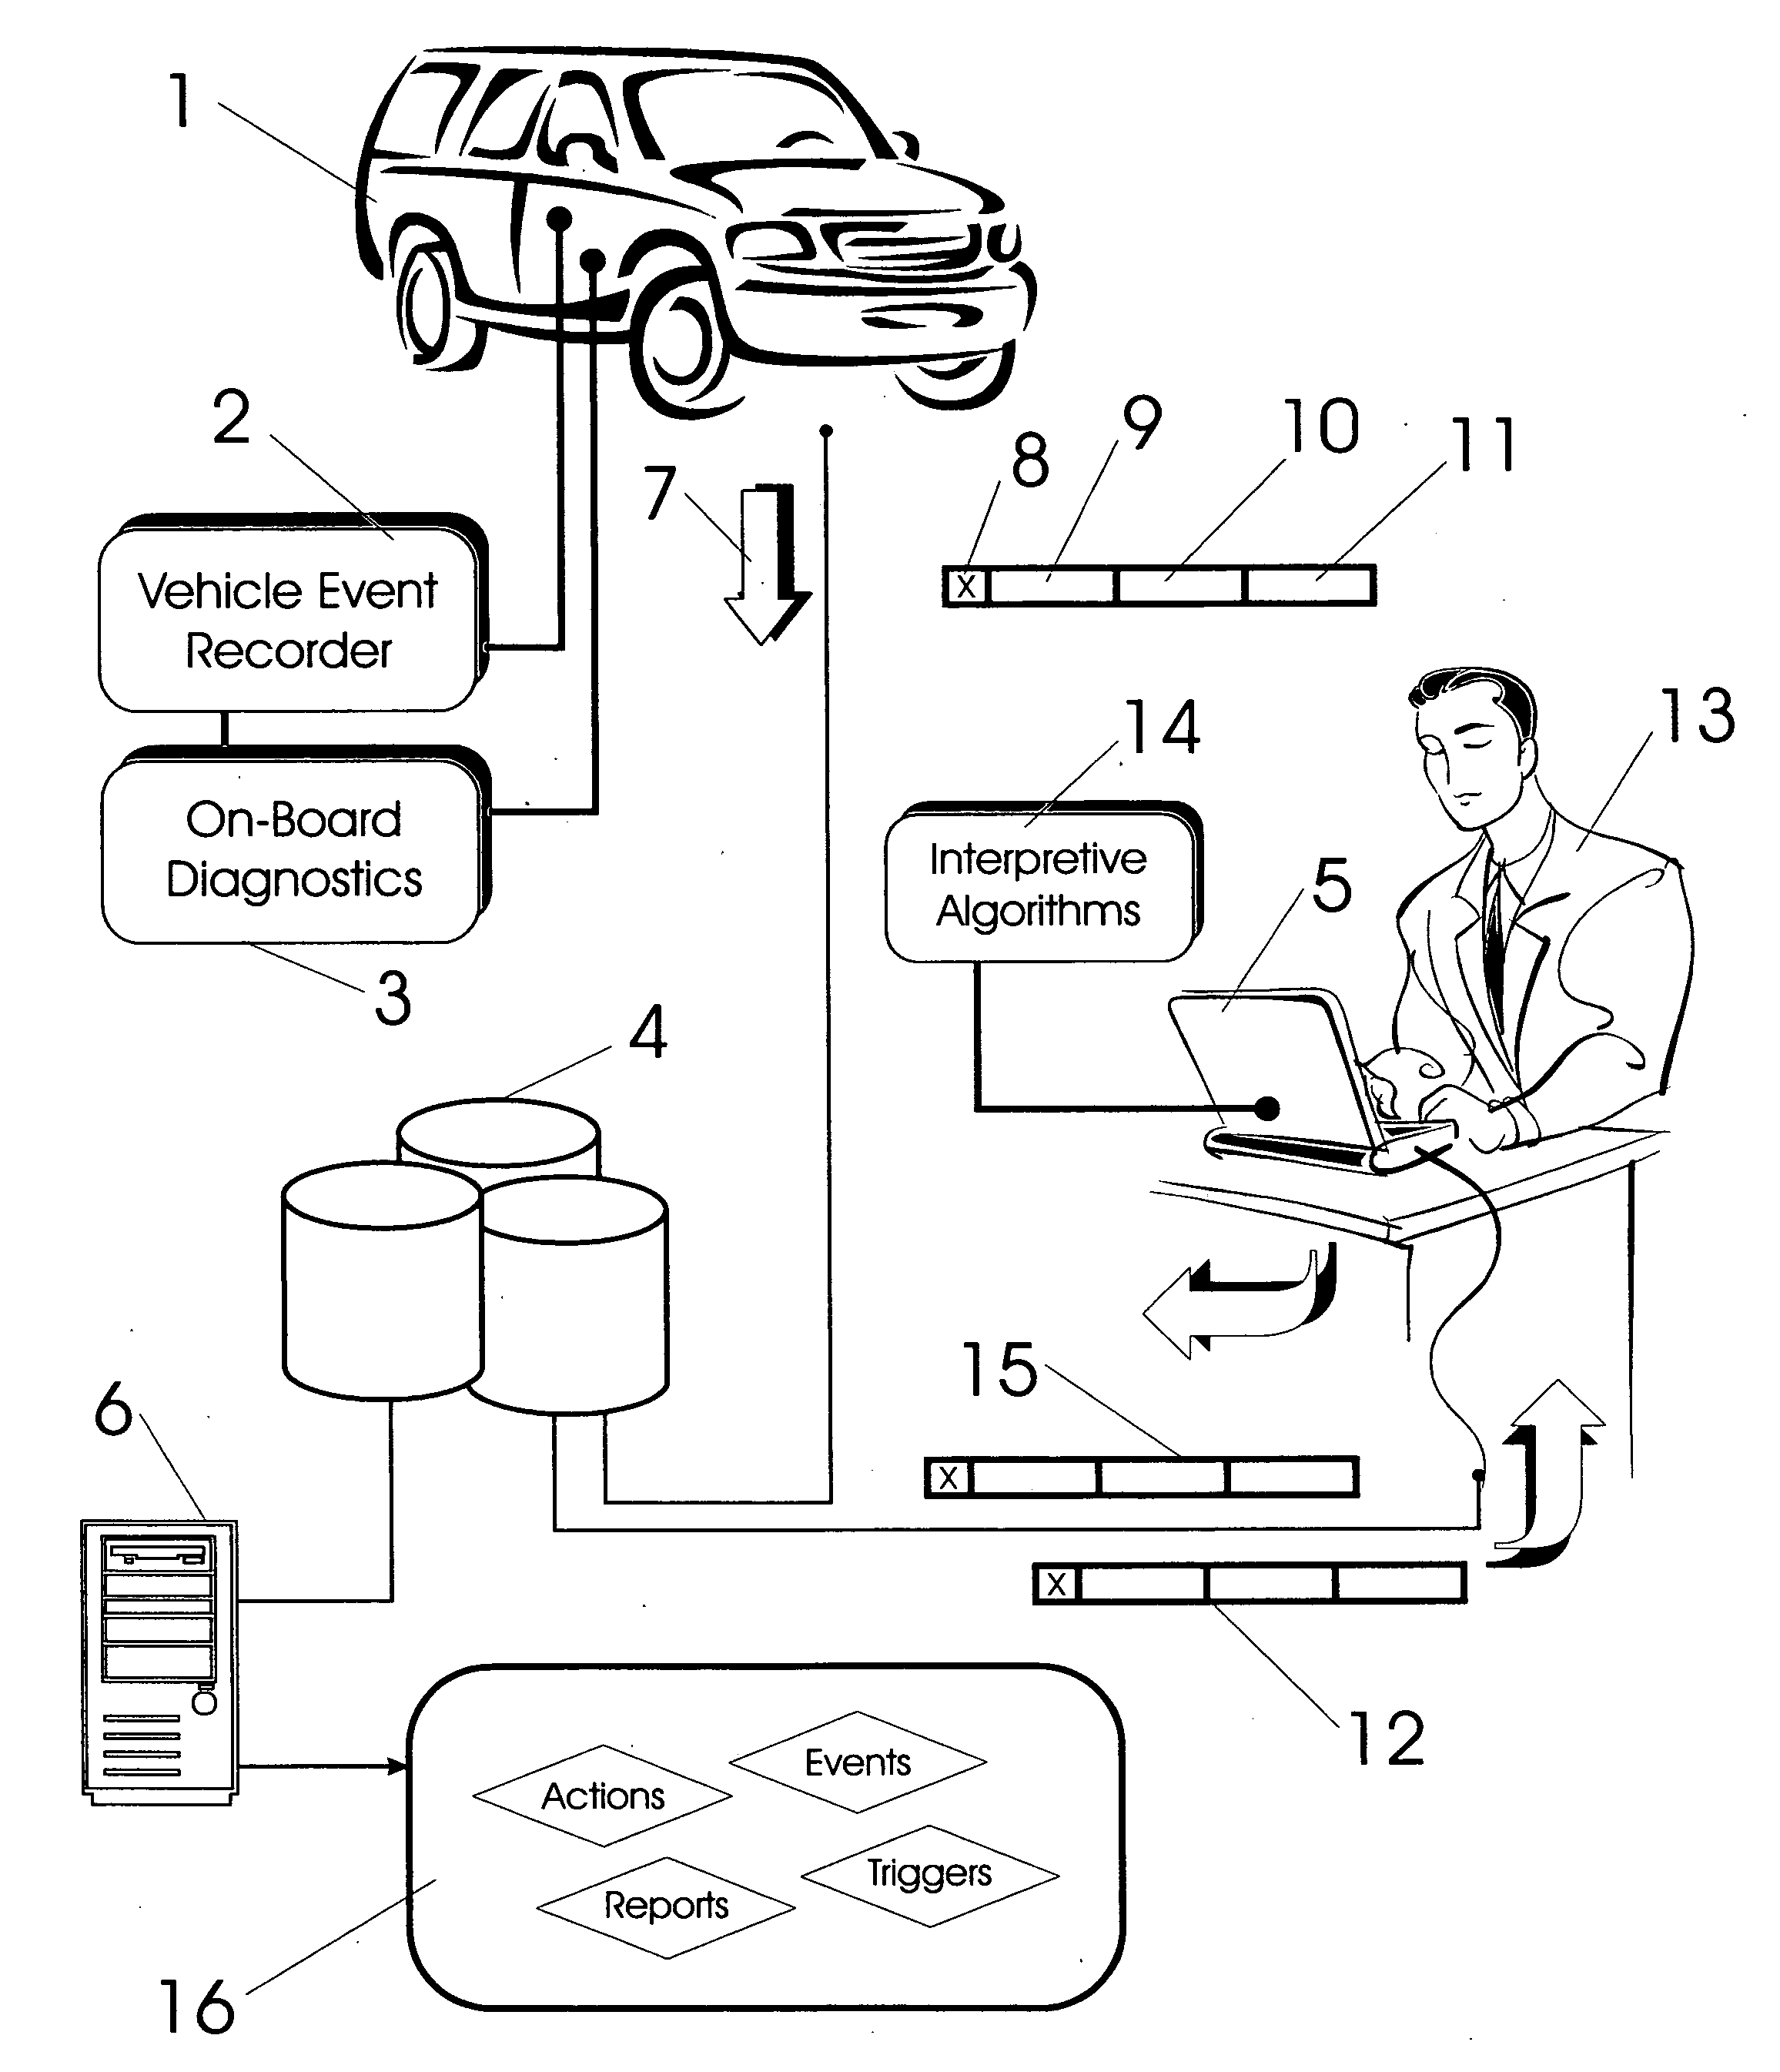 Discretization facilities for vehicle event data recorders